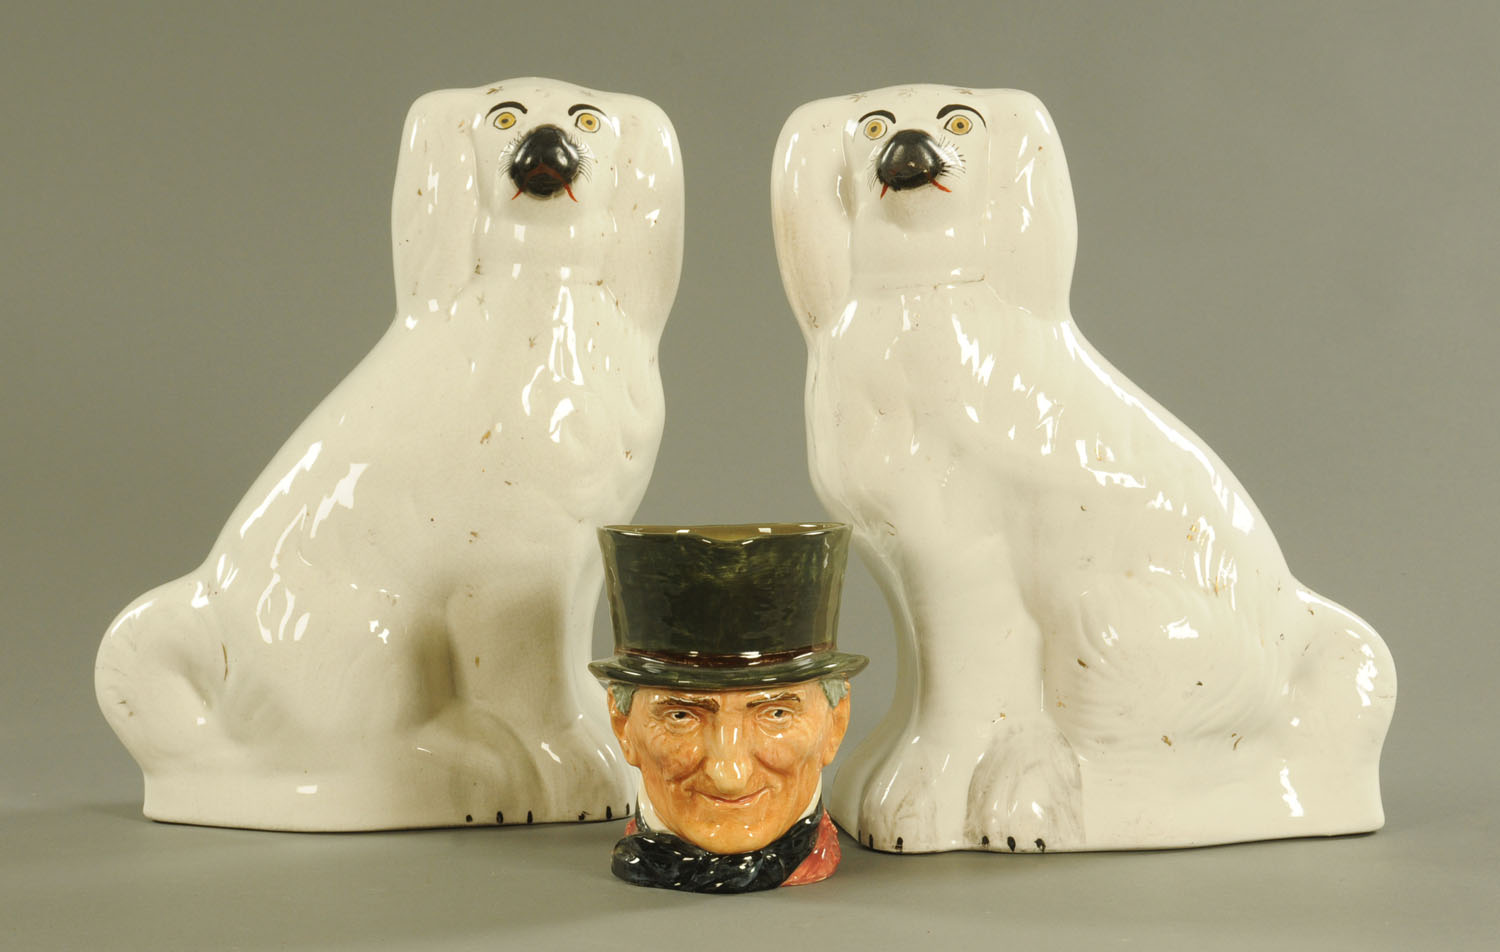 A pair of large Staffordshire style dogs, height 37 cm, and a Royal Doulton John Peel jug.